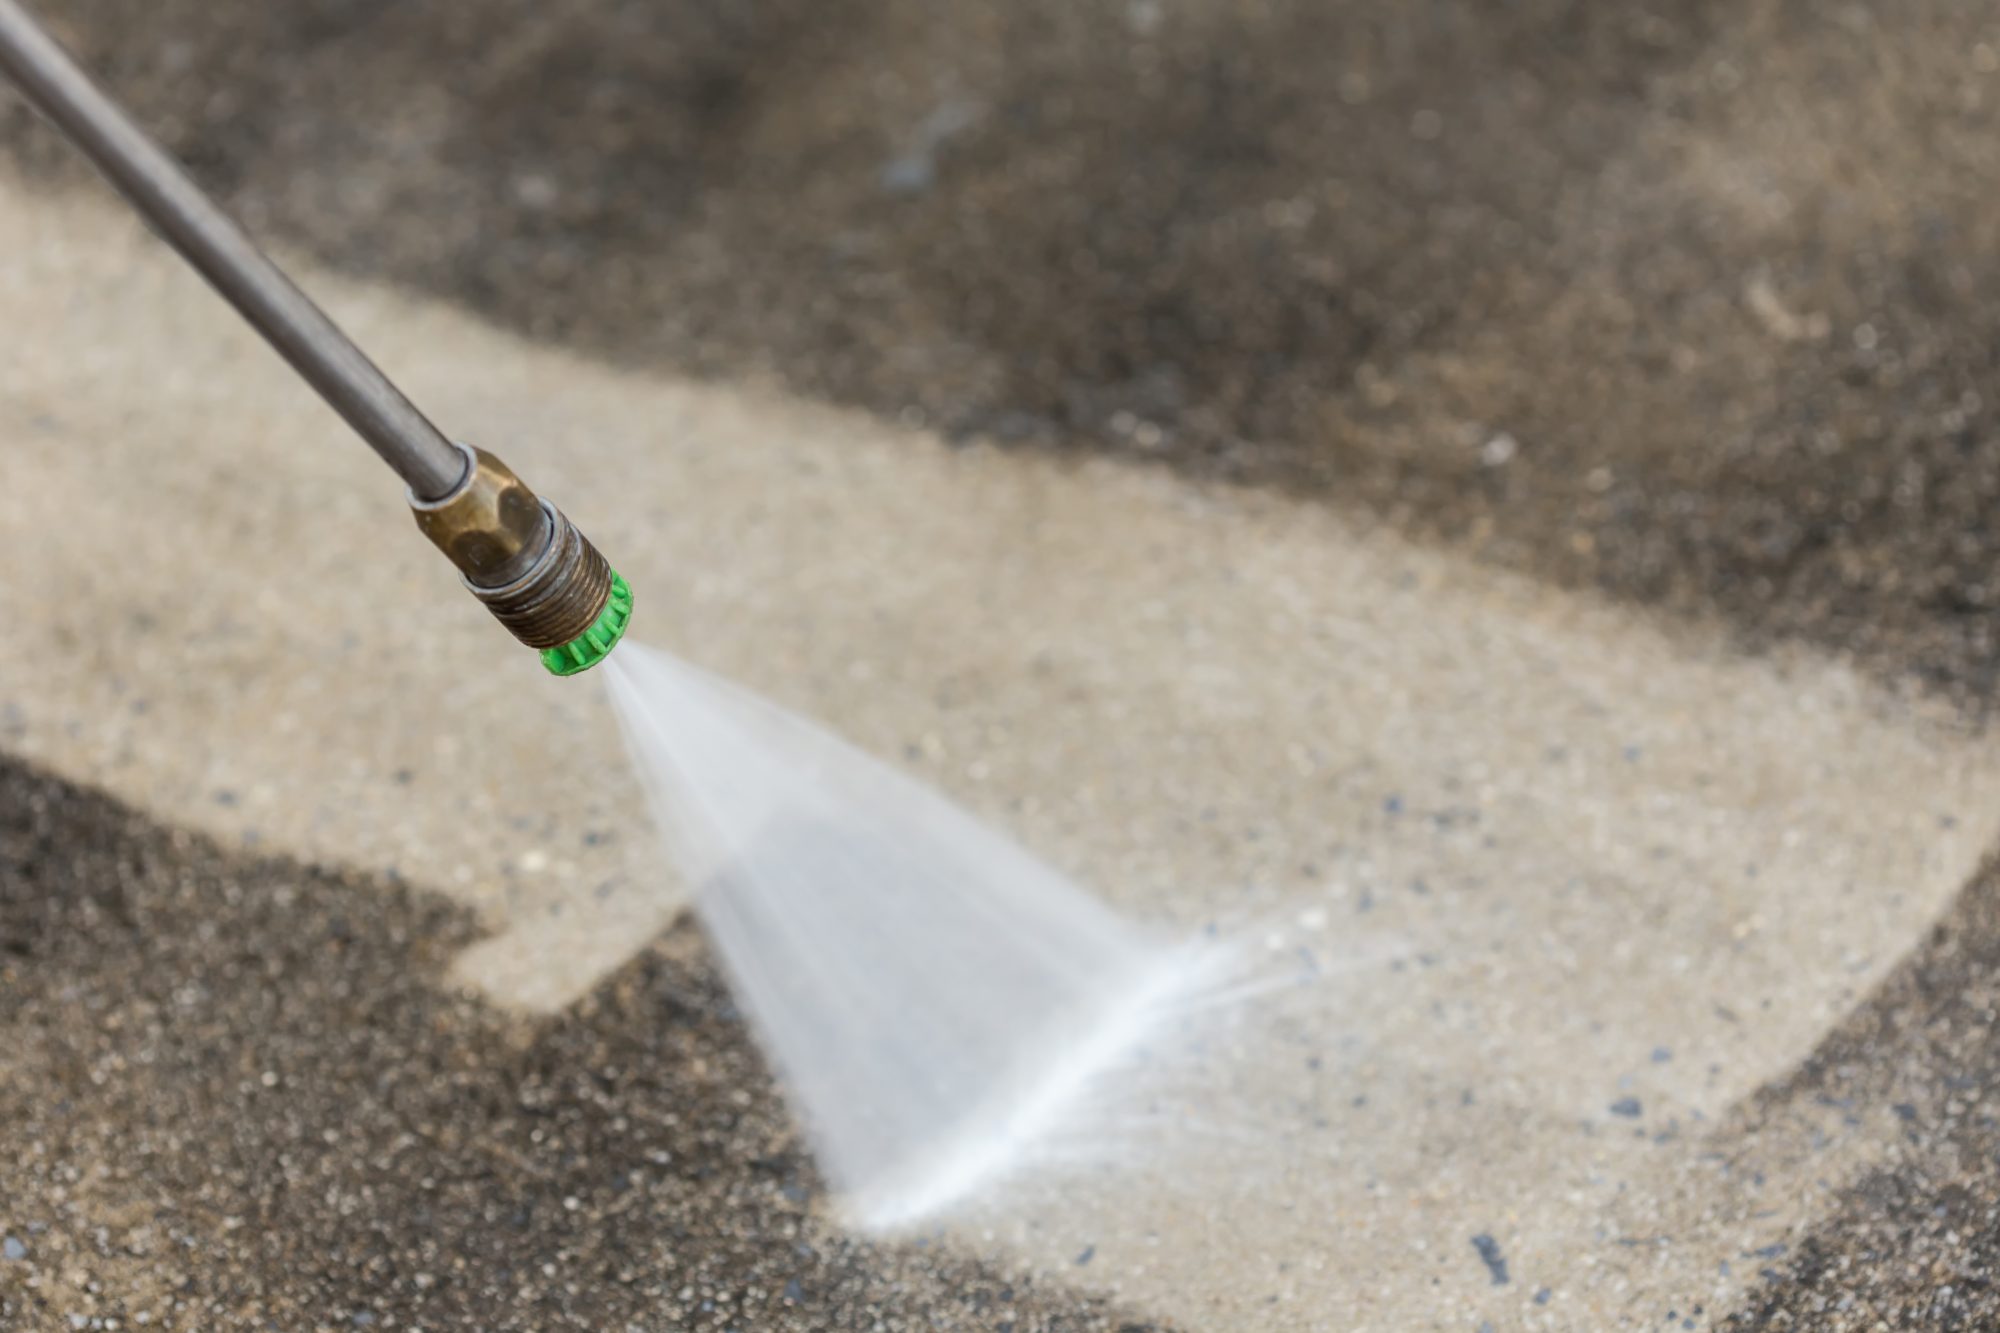 The Uses of Different Pressure Washer Nozzles